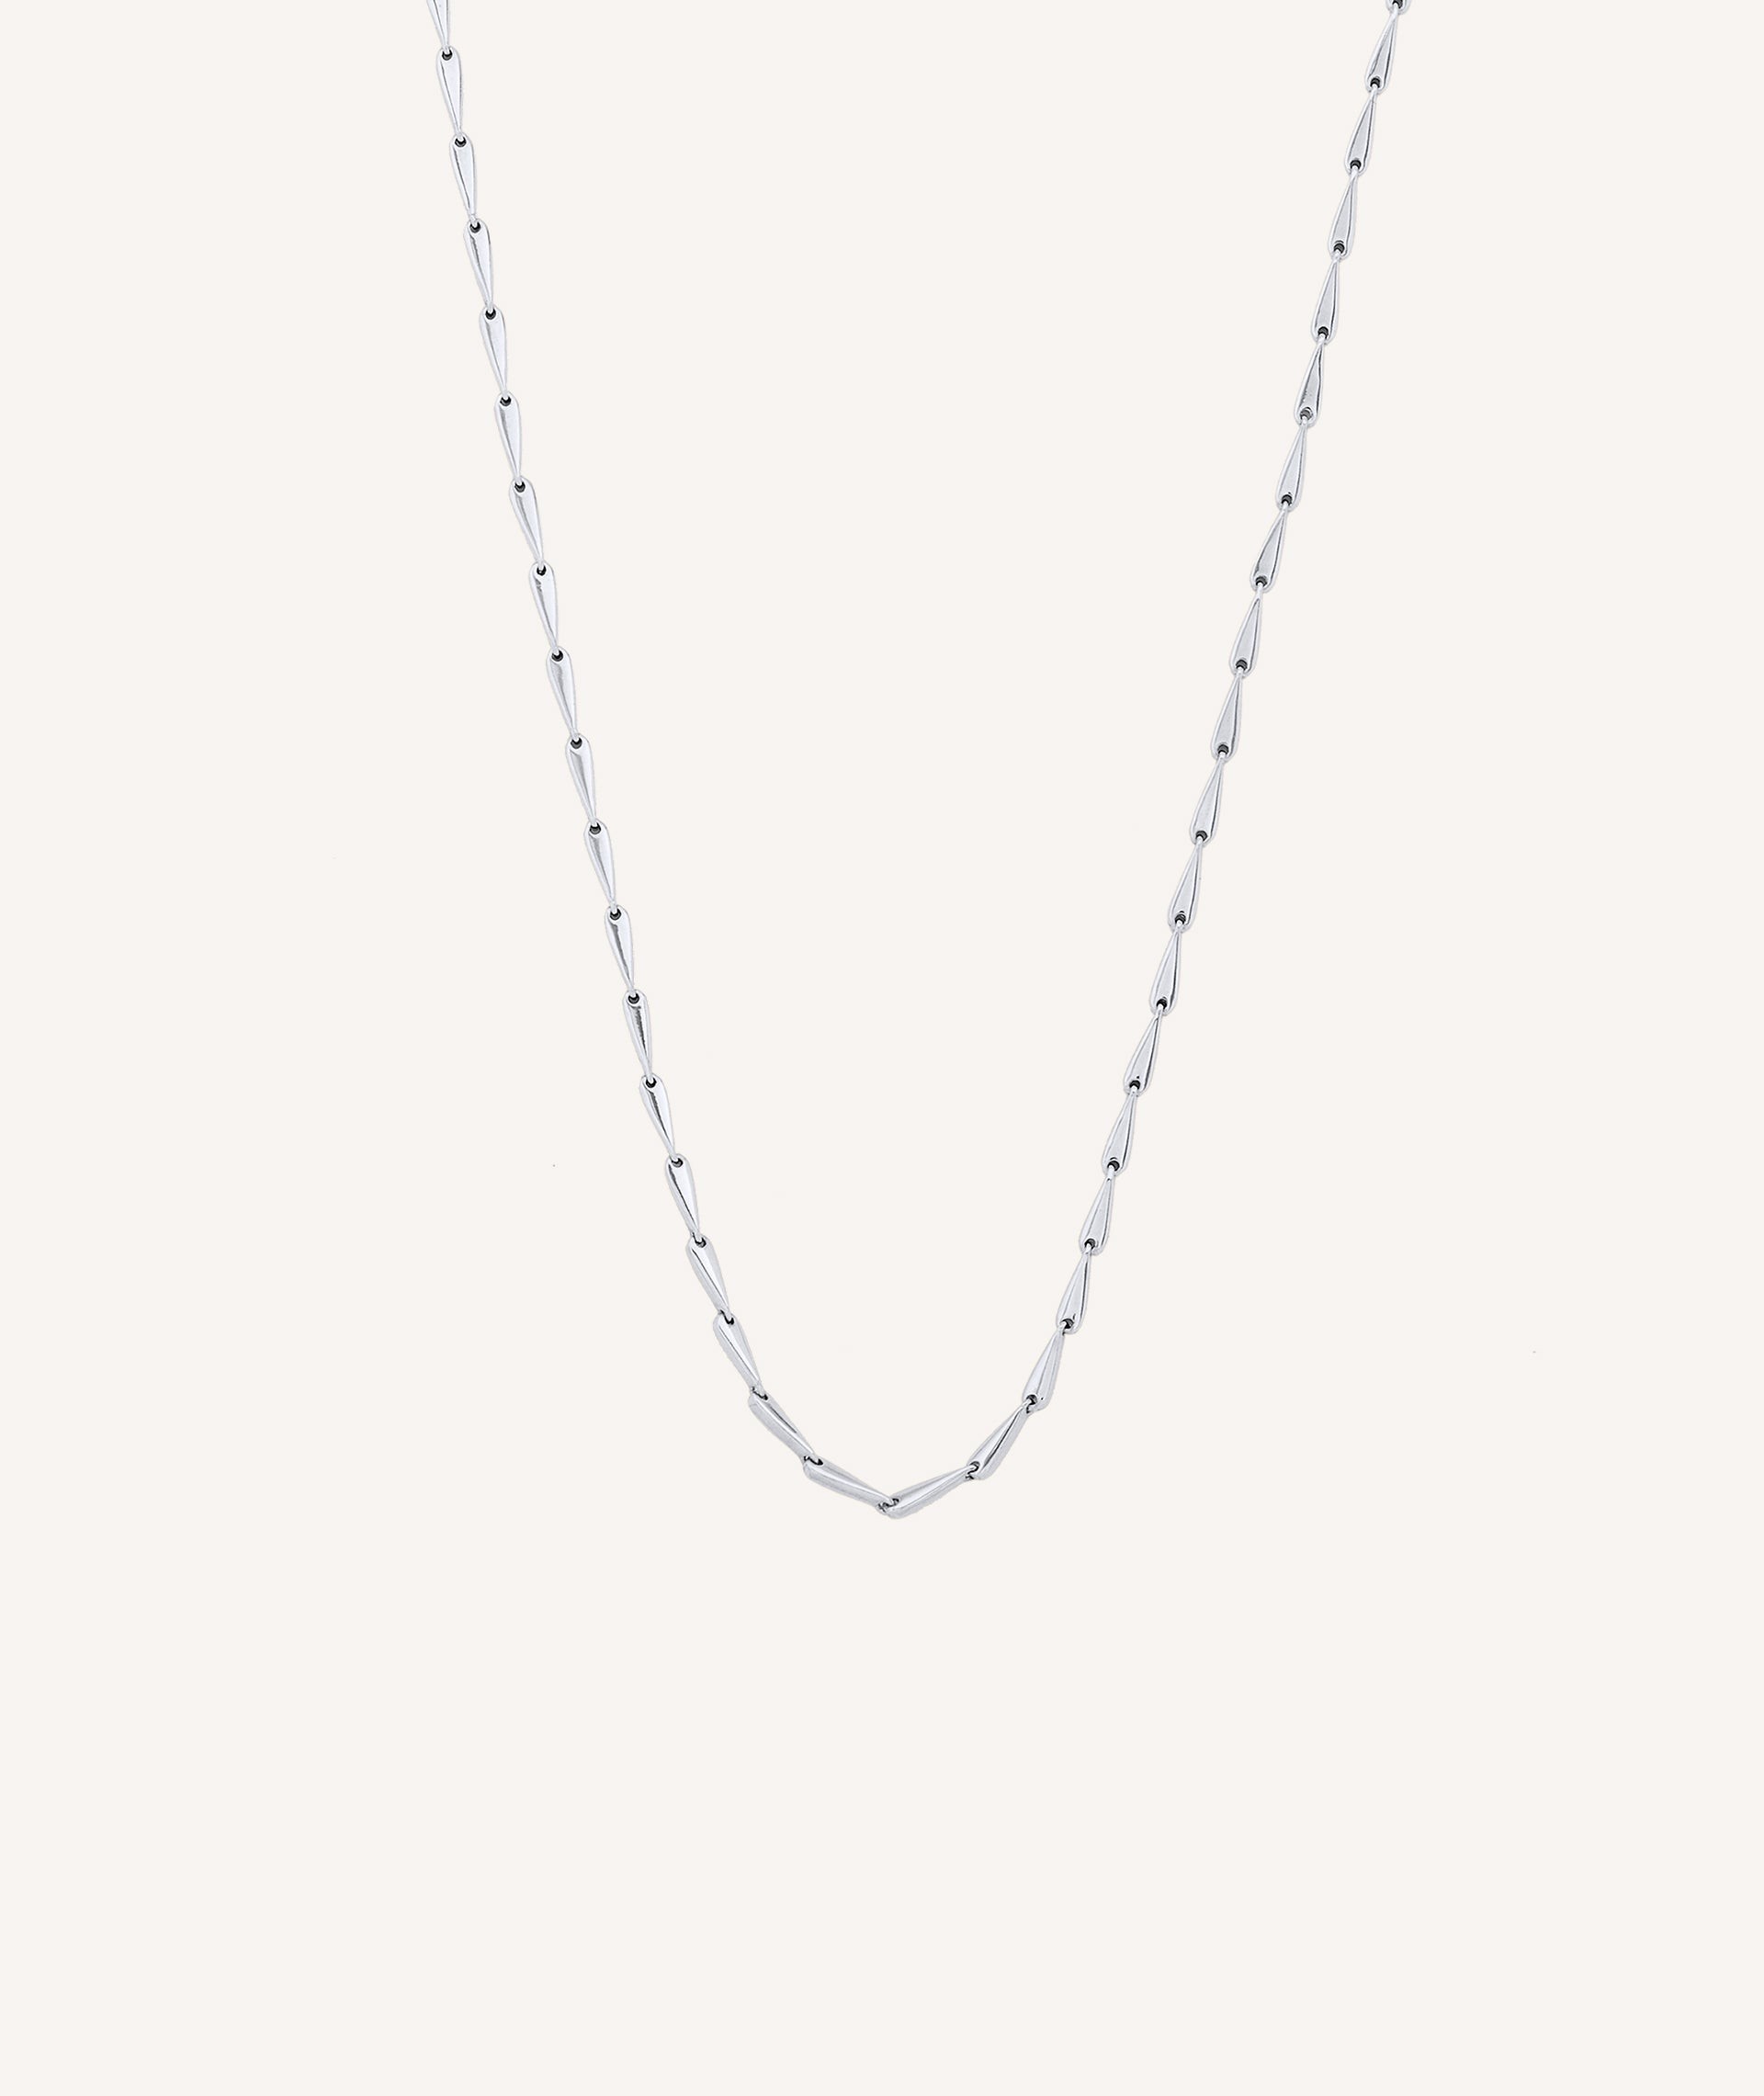 Necklace Cascade 925 silver rhodium plated chain